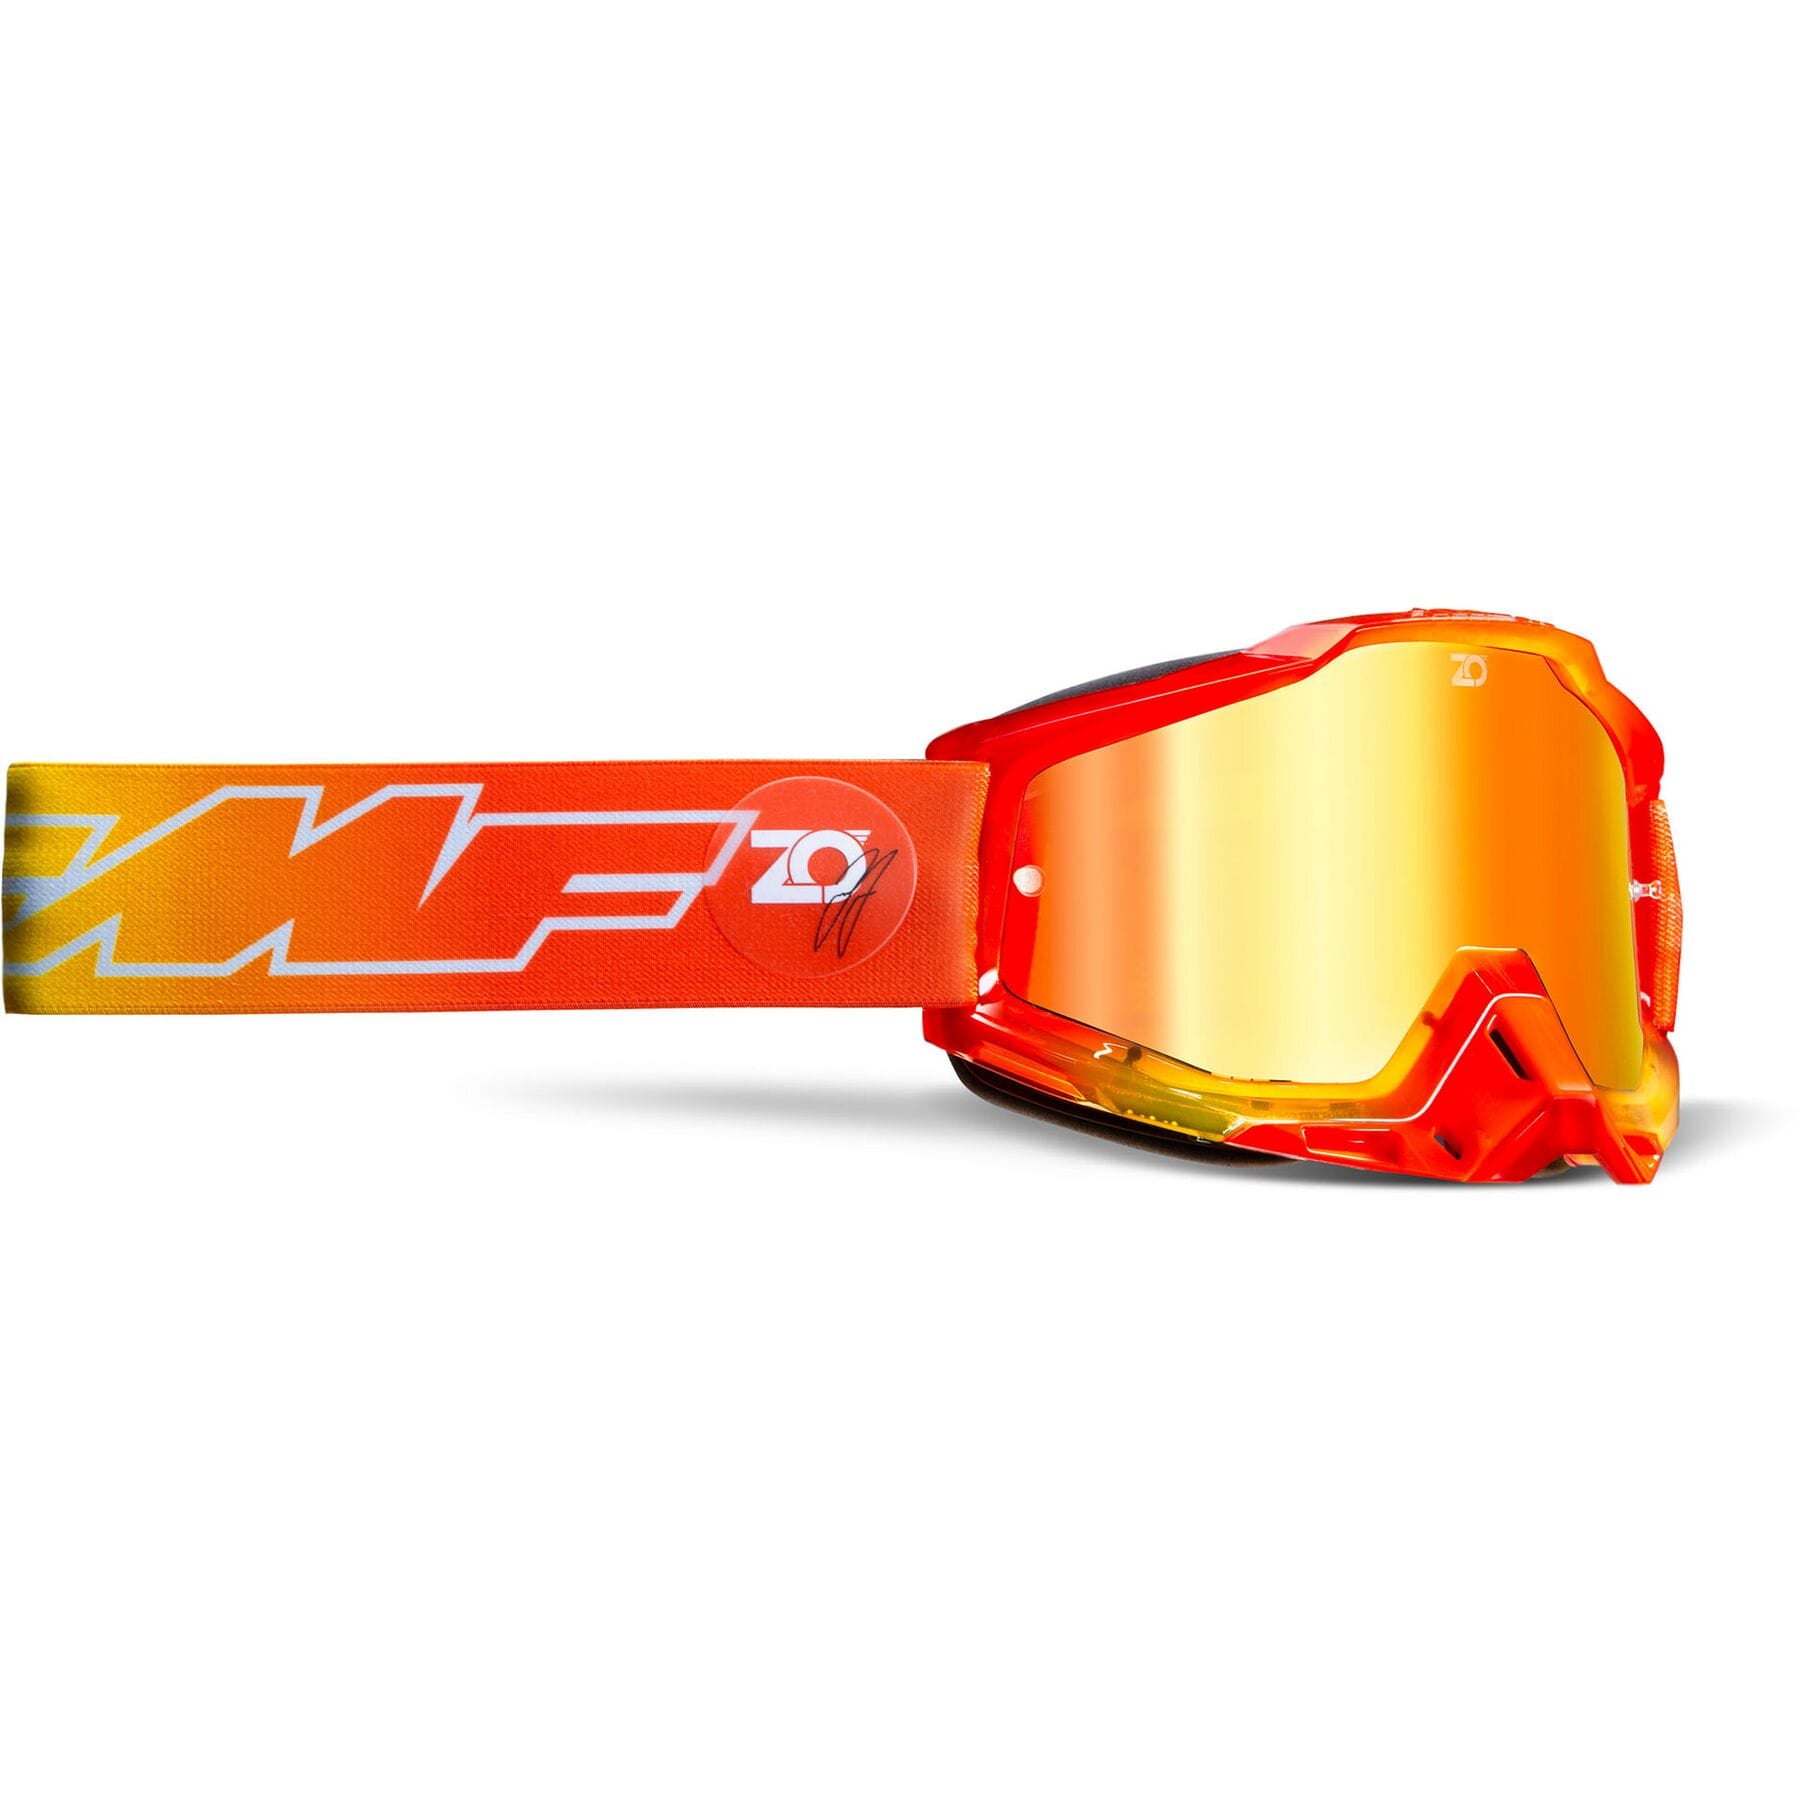 POWERBOMB Goggle Osborne with Mirror Red Lens on white background.